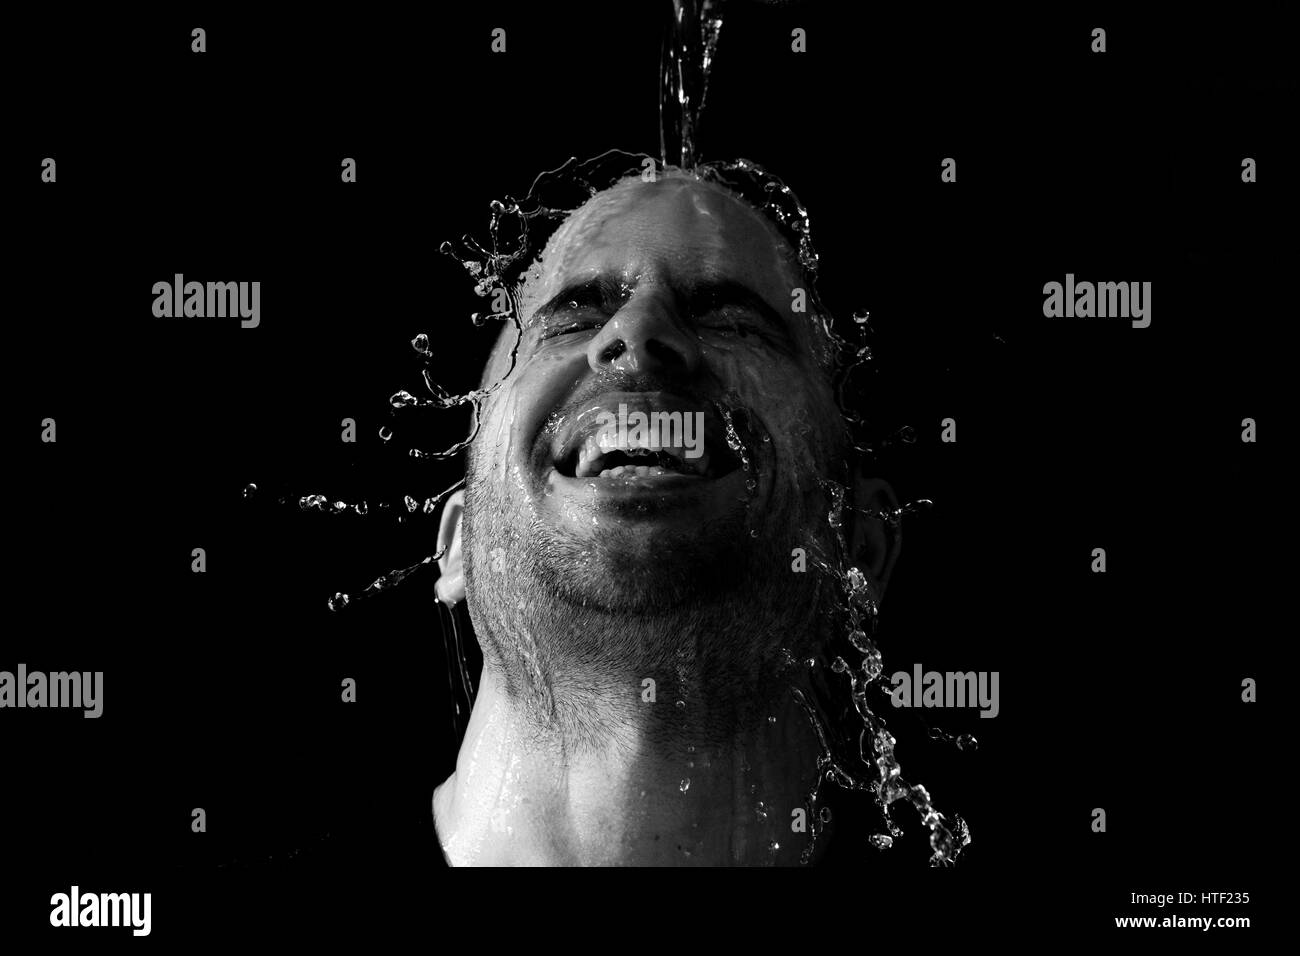 Portrait of a man being thrown water in the face against a black background Stock Photo